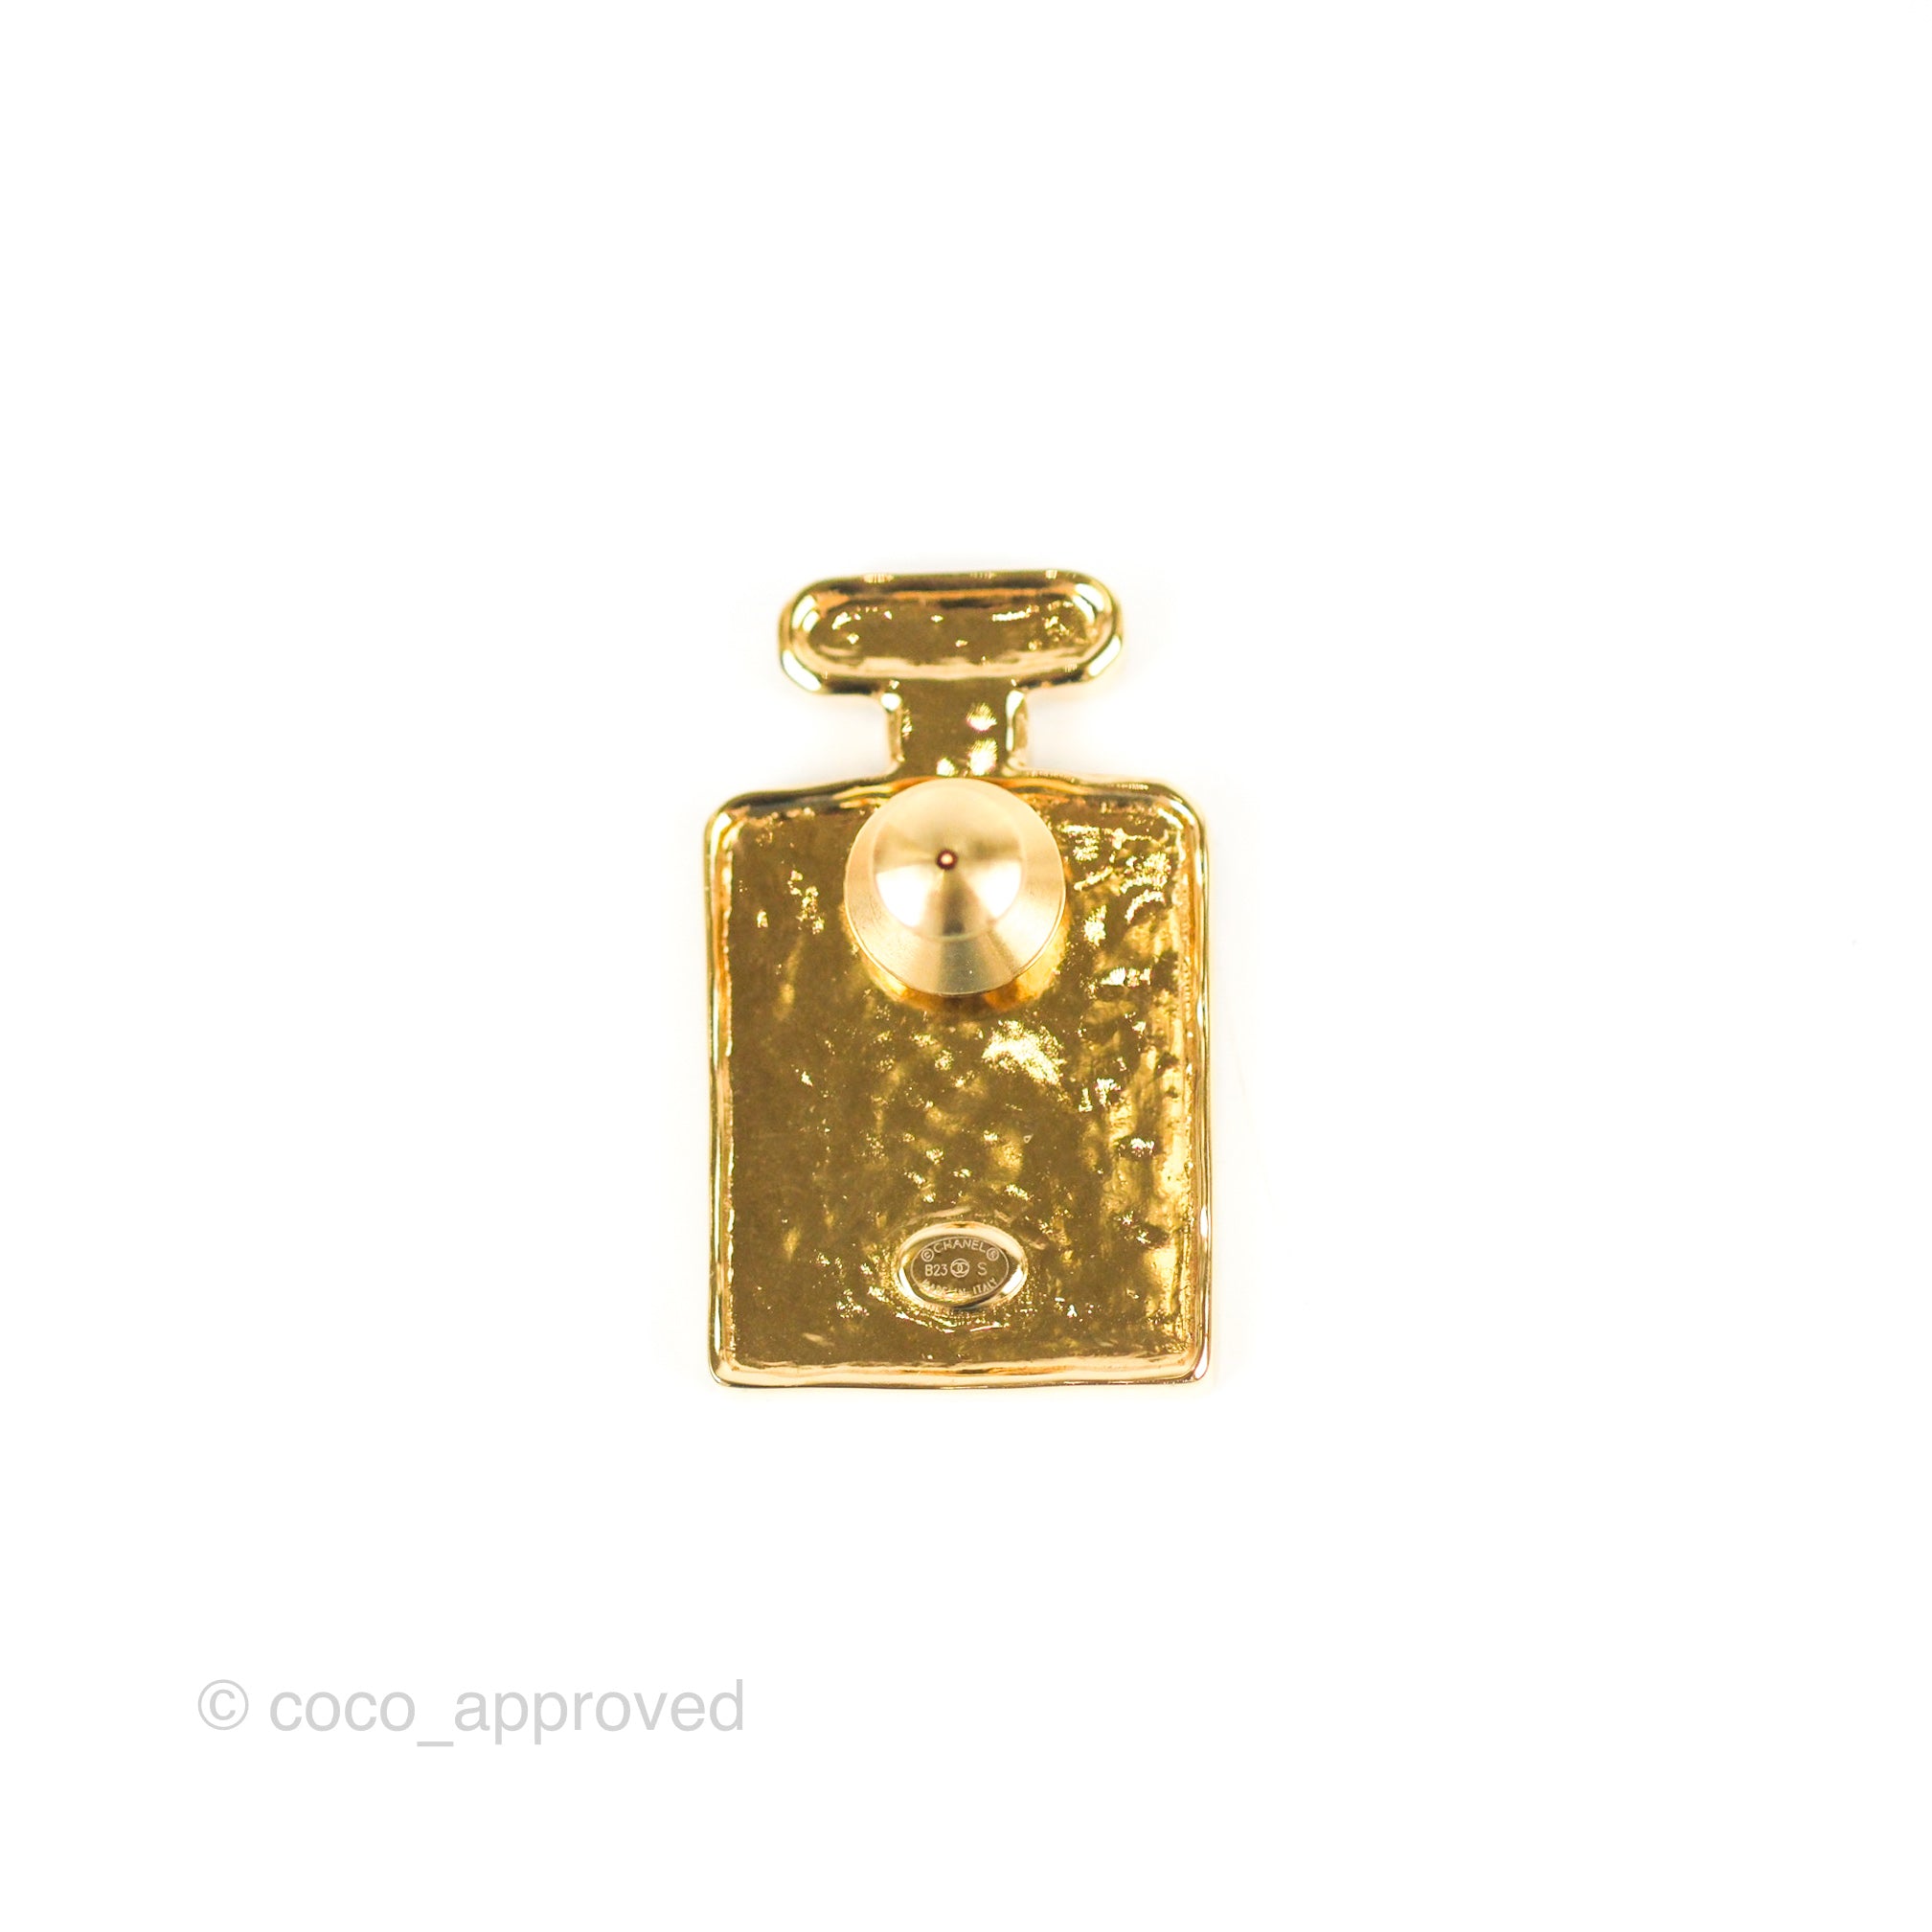 Chanel No. 5 Perfume Bottle Lapel Pin - Gold-Plated Pin, Brooches